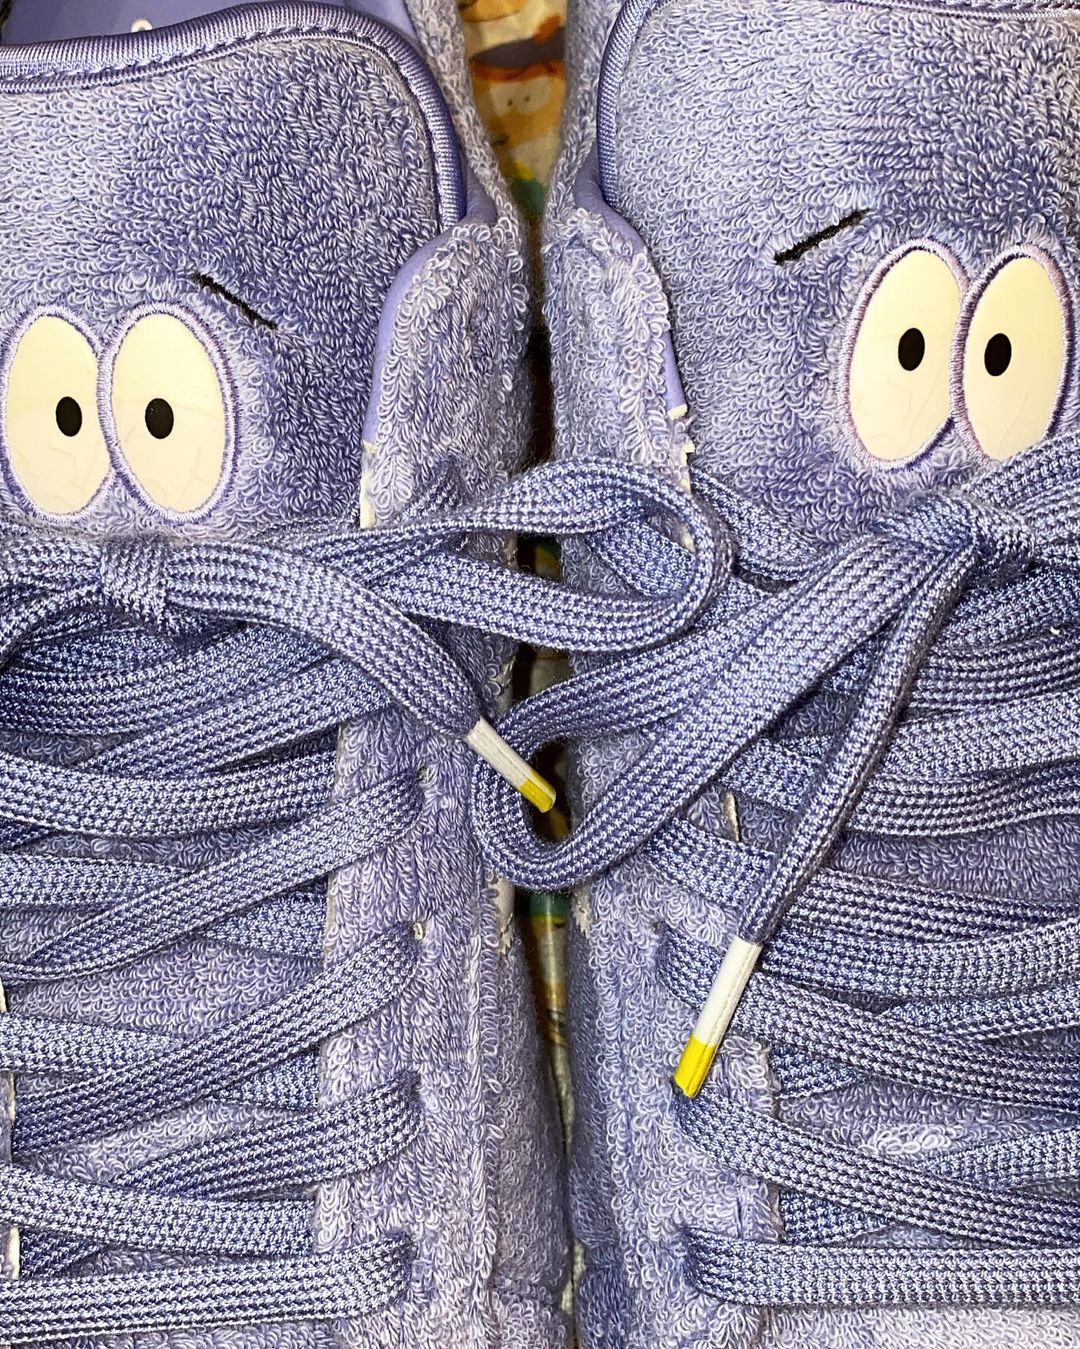 South Park x adidas Campus “Towelie” Releasing on 4/20